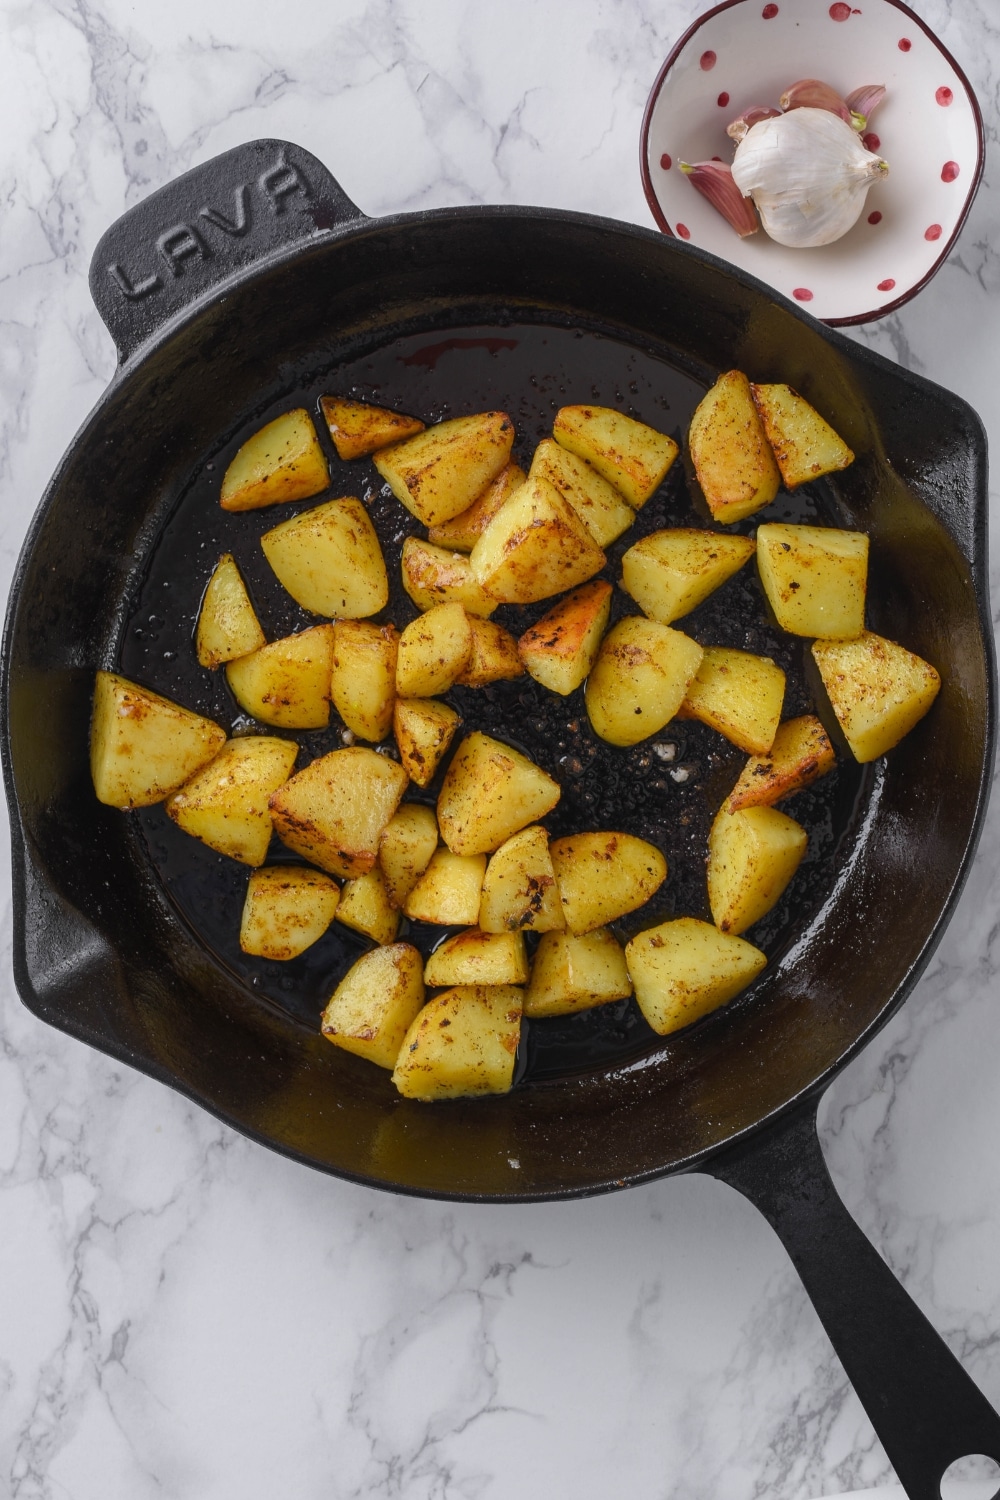 Chopped potatoes sauteeing in a cast iron skillet next to a small bowl of garlic bulbs.